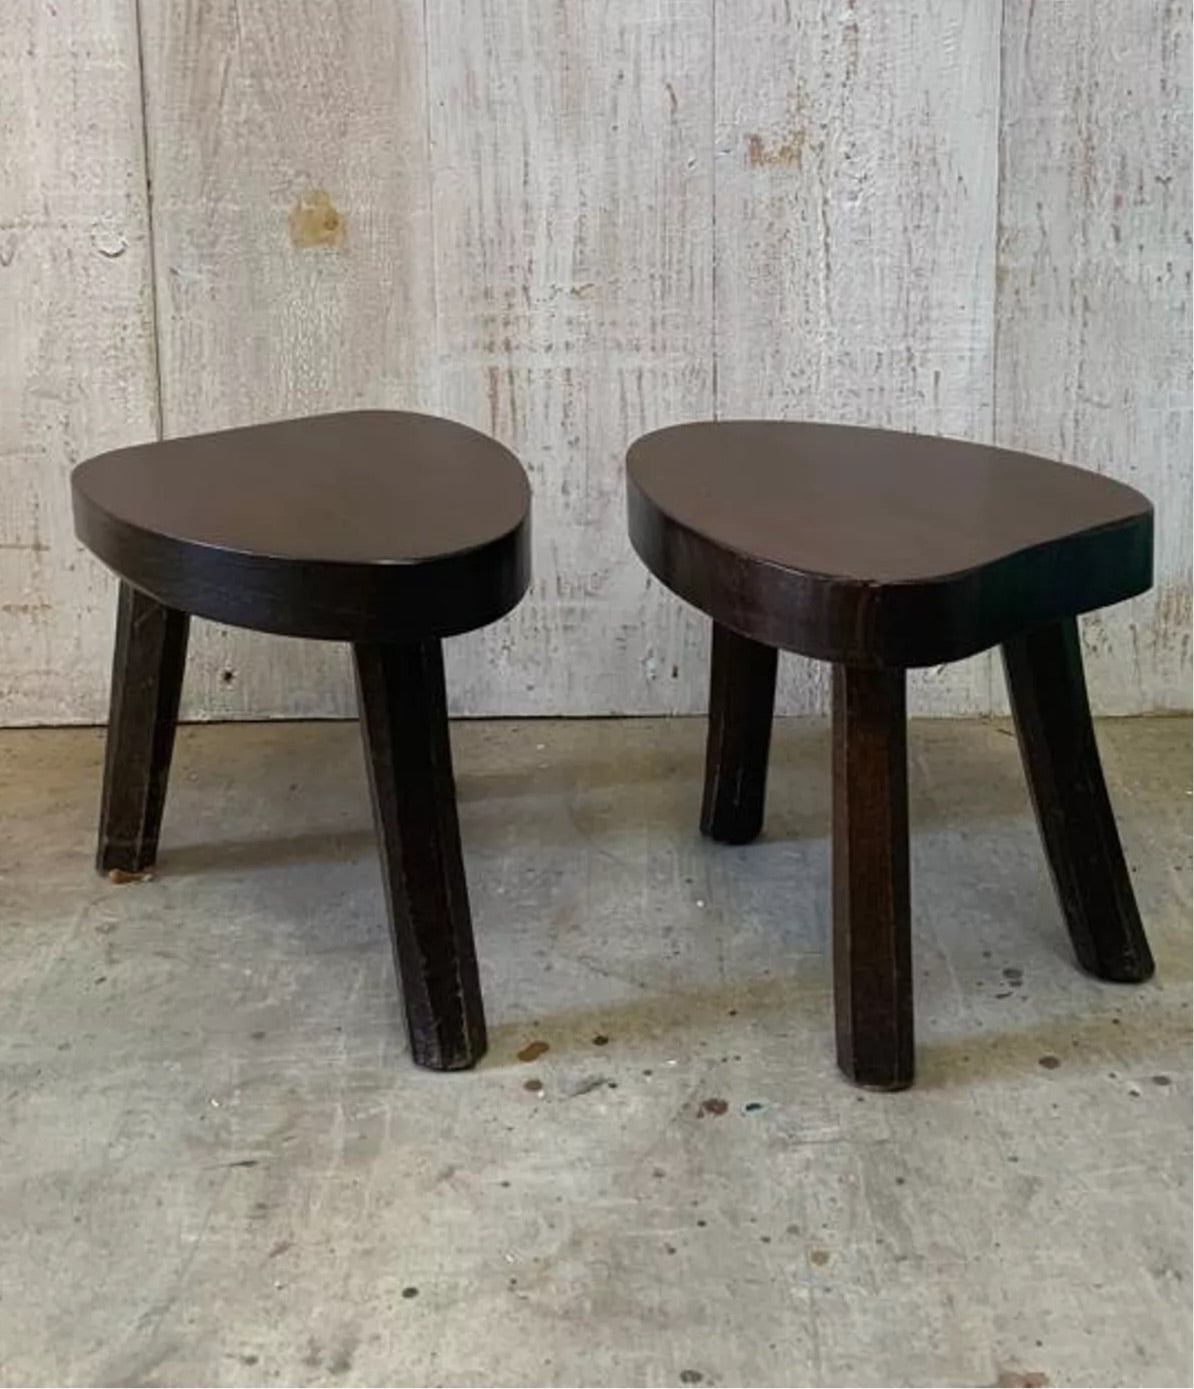 1960 Brutalist French Stools